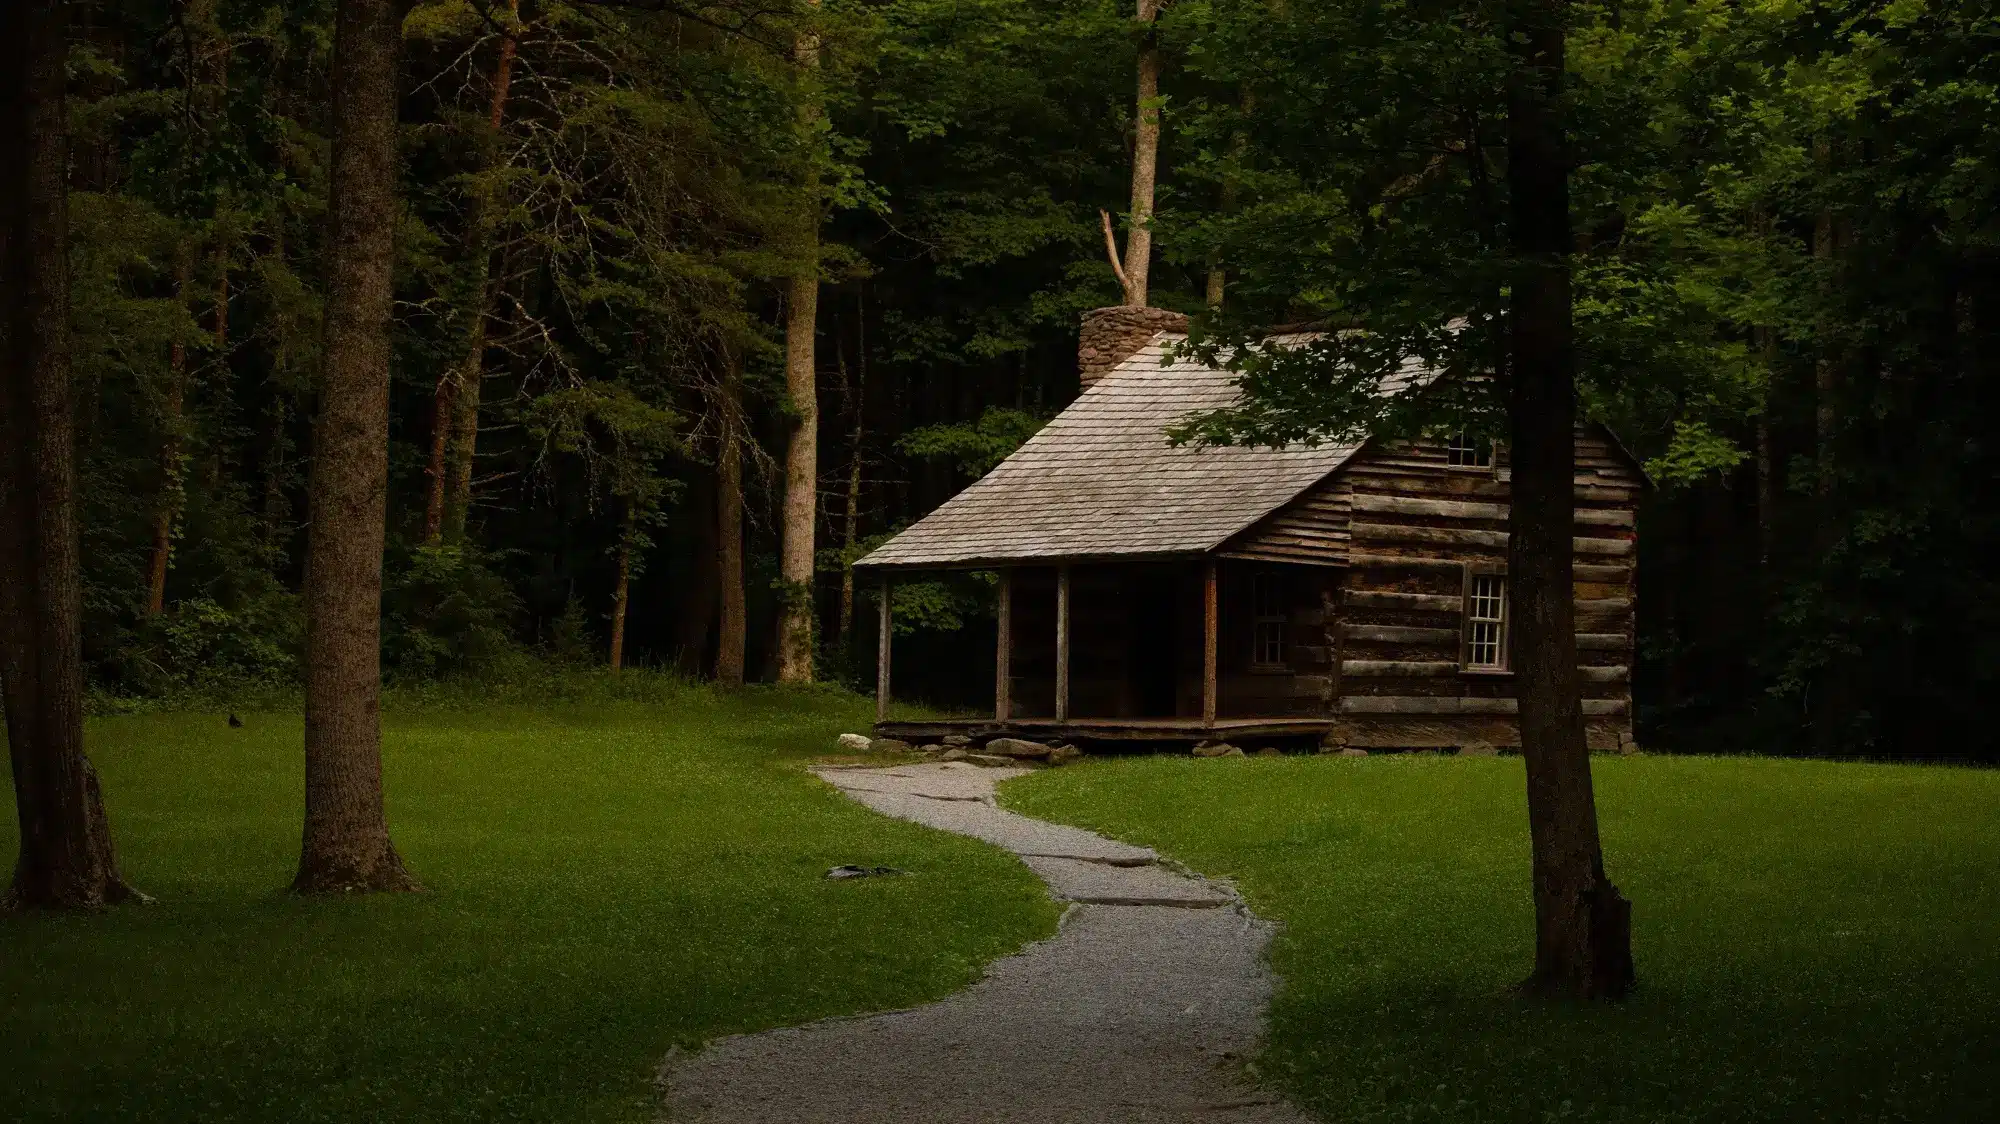 The Carter Shield’s Cabin at Cades Cove, Great Smoky Mountains National Park, representing the concept of living away from home allowance.